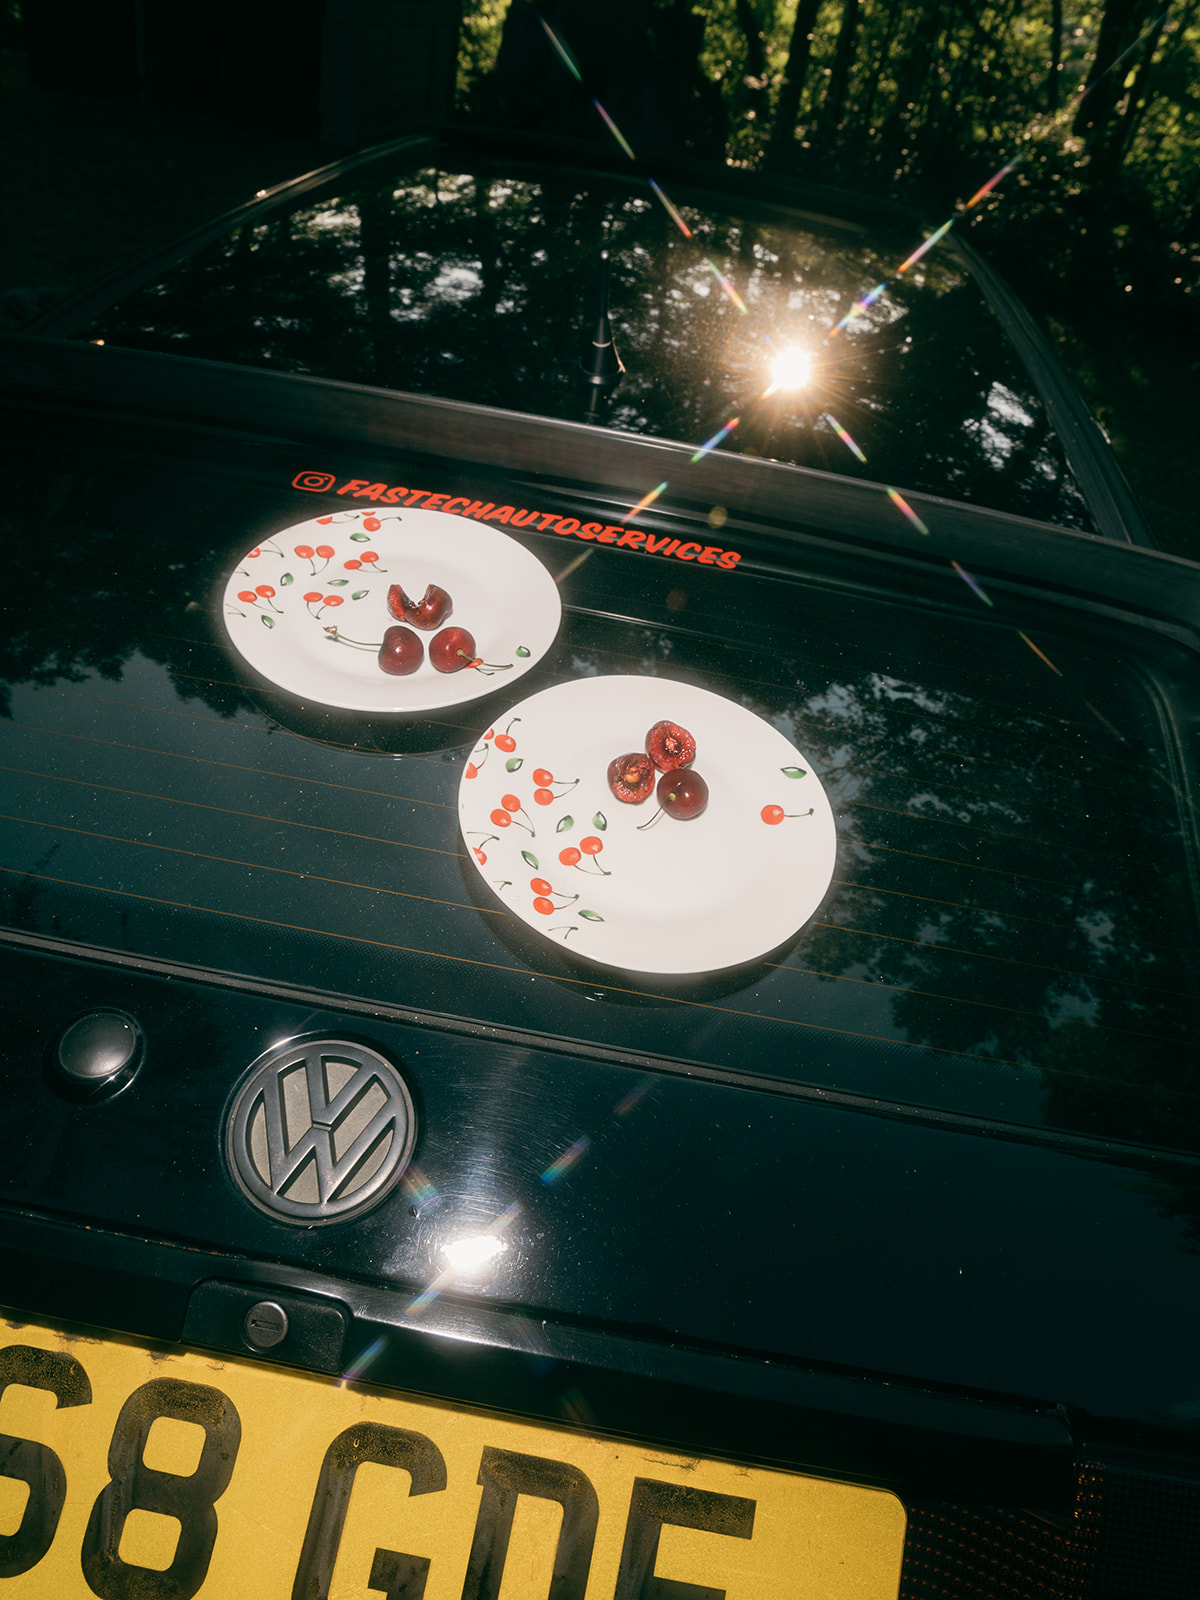 Cherries on cherry plates on a mk3 GTI trunk lid